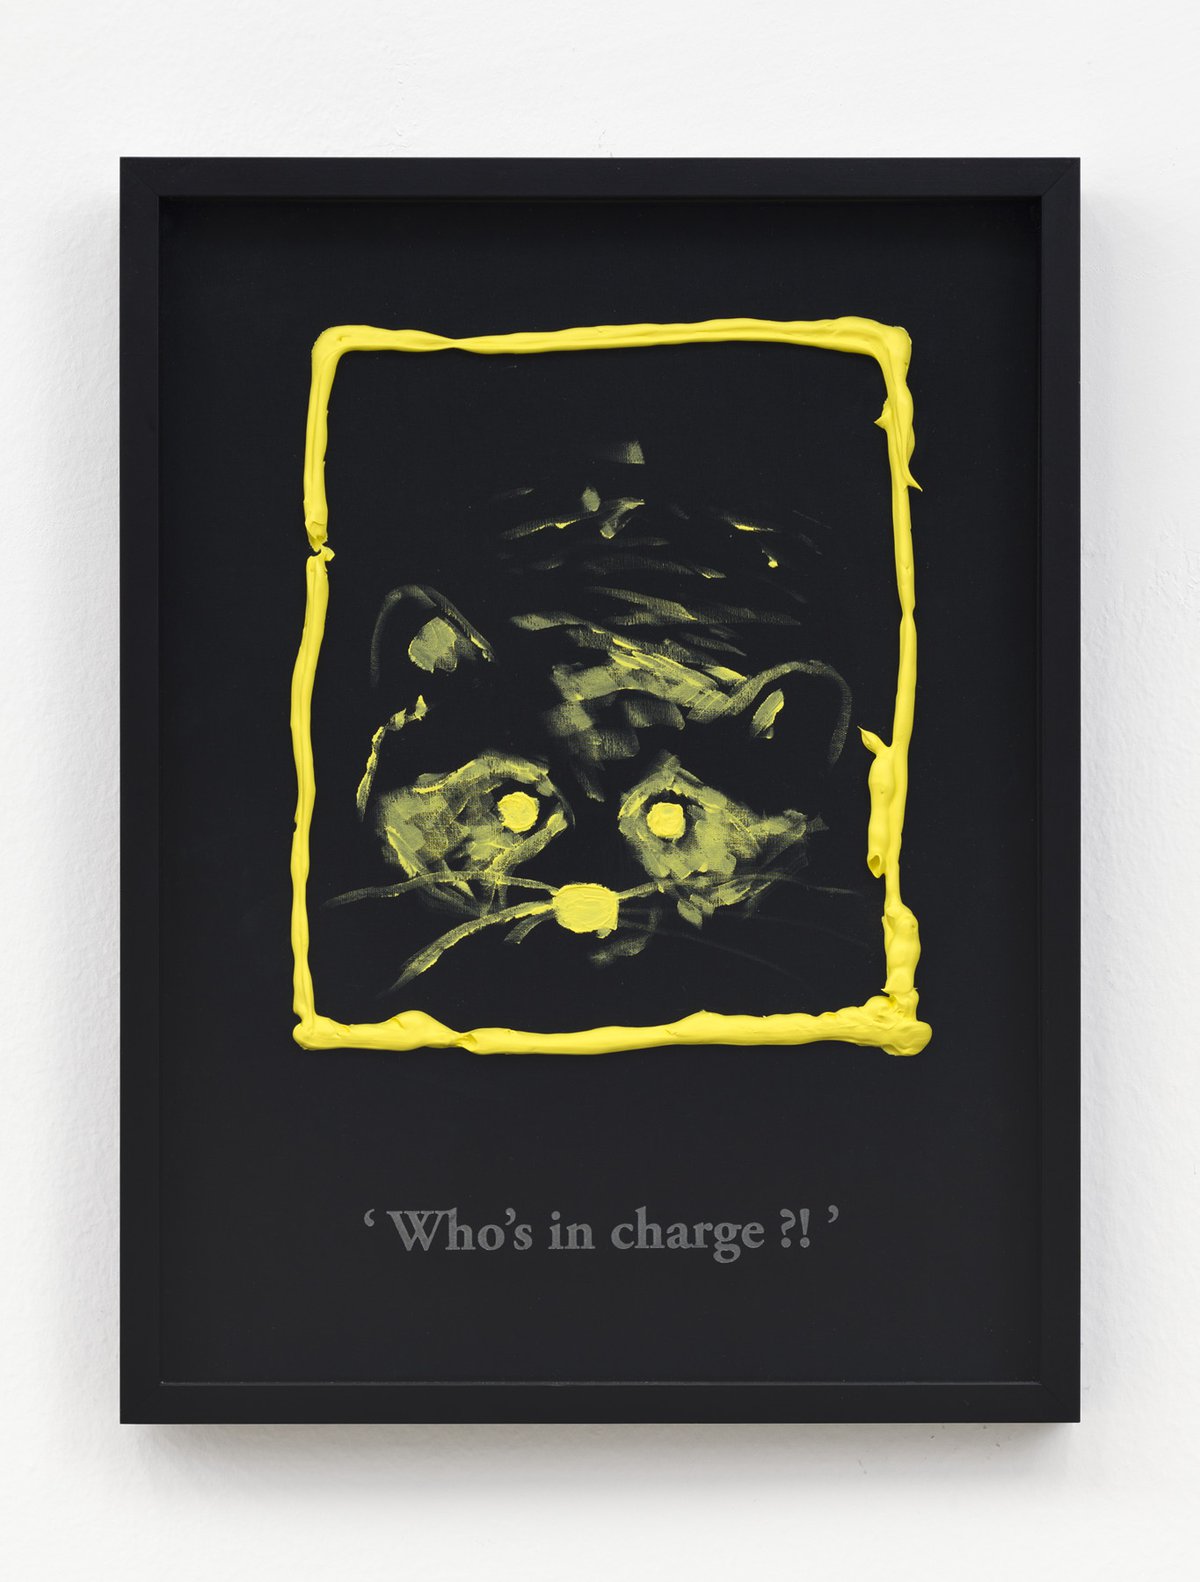 Philipp Timischl&quot;Who&#x27;s in charge?!&quot; (Black/Cadmium Yellow Light), 2017Acrylic on linen and glass-engraved object frame40.1 x 32.1 cm